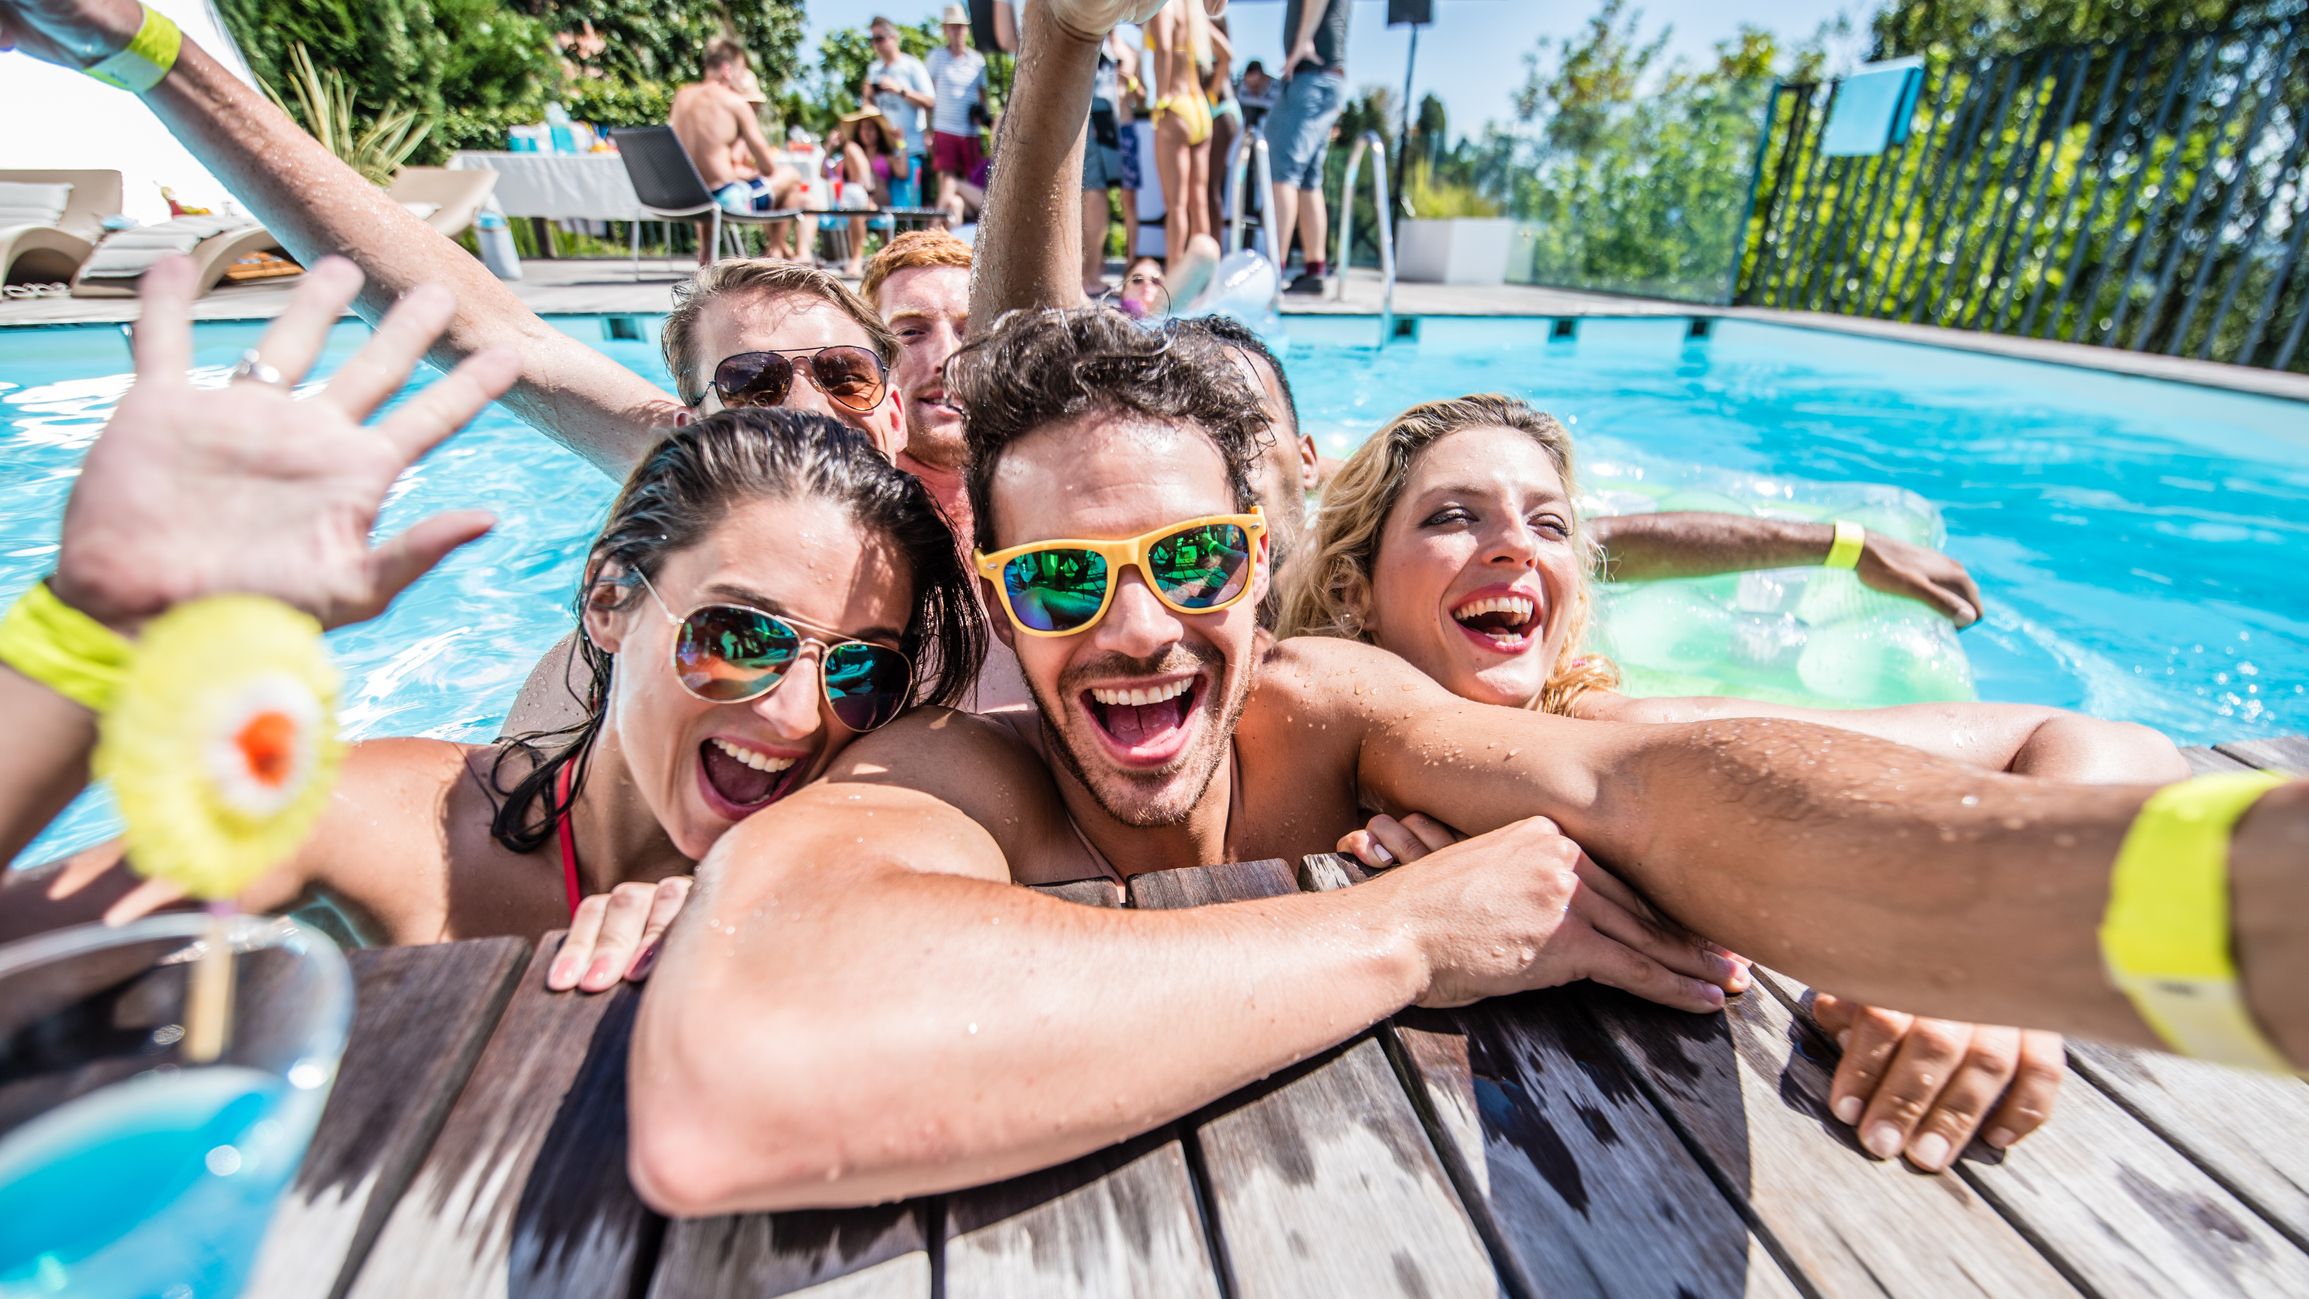 7 Tips For Throwing An AMAZING Pool Party